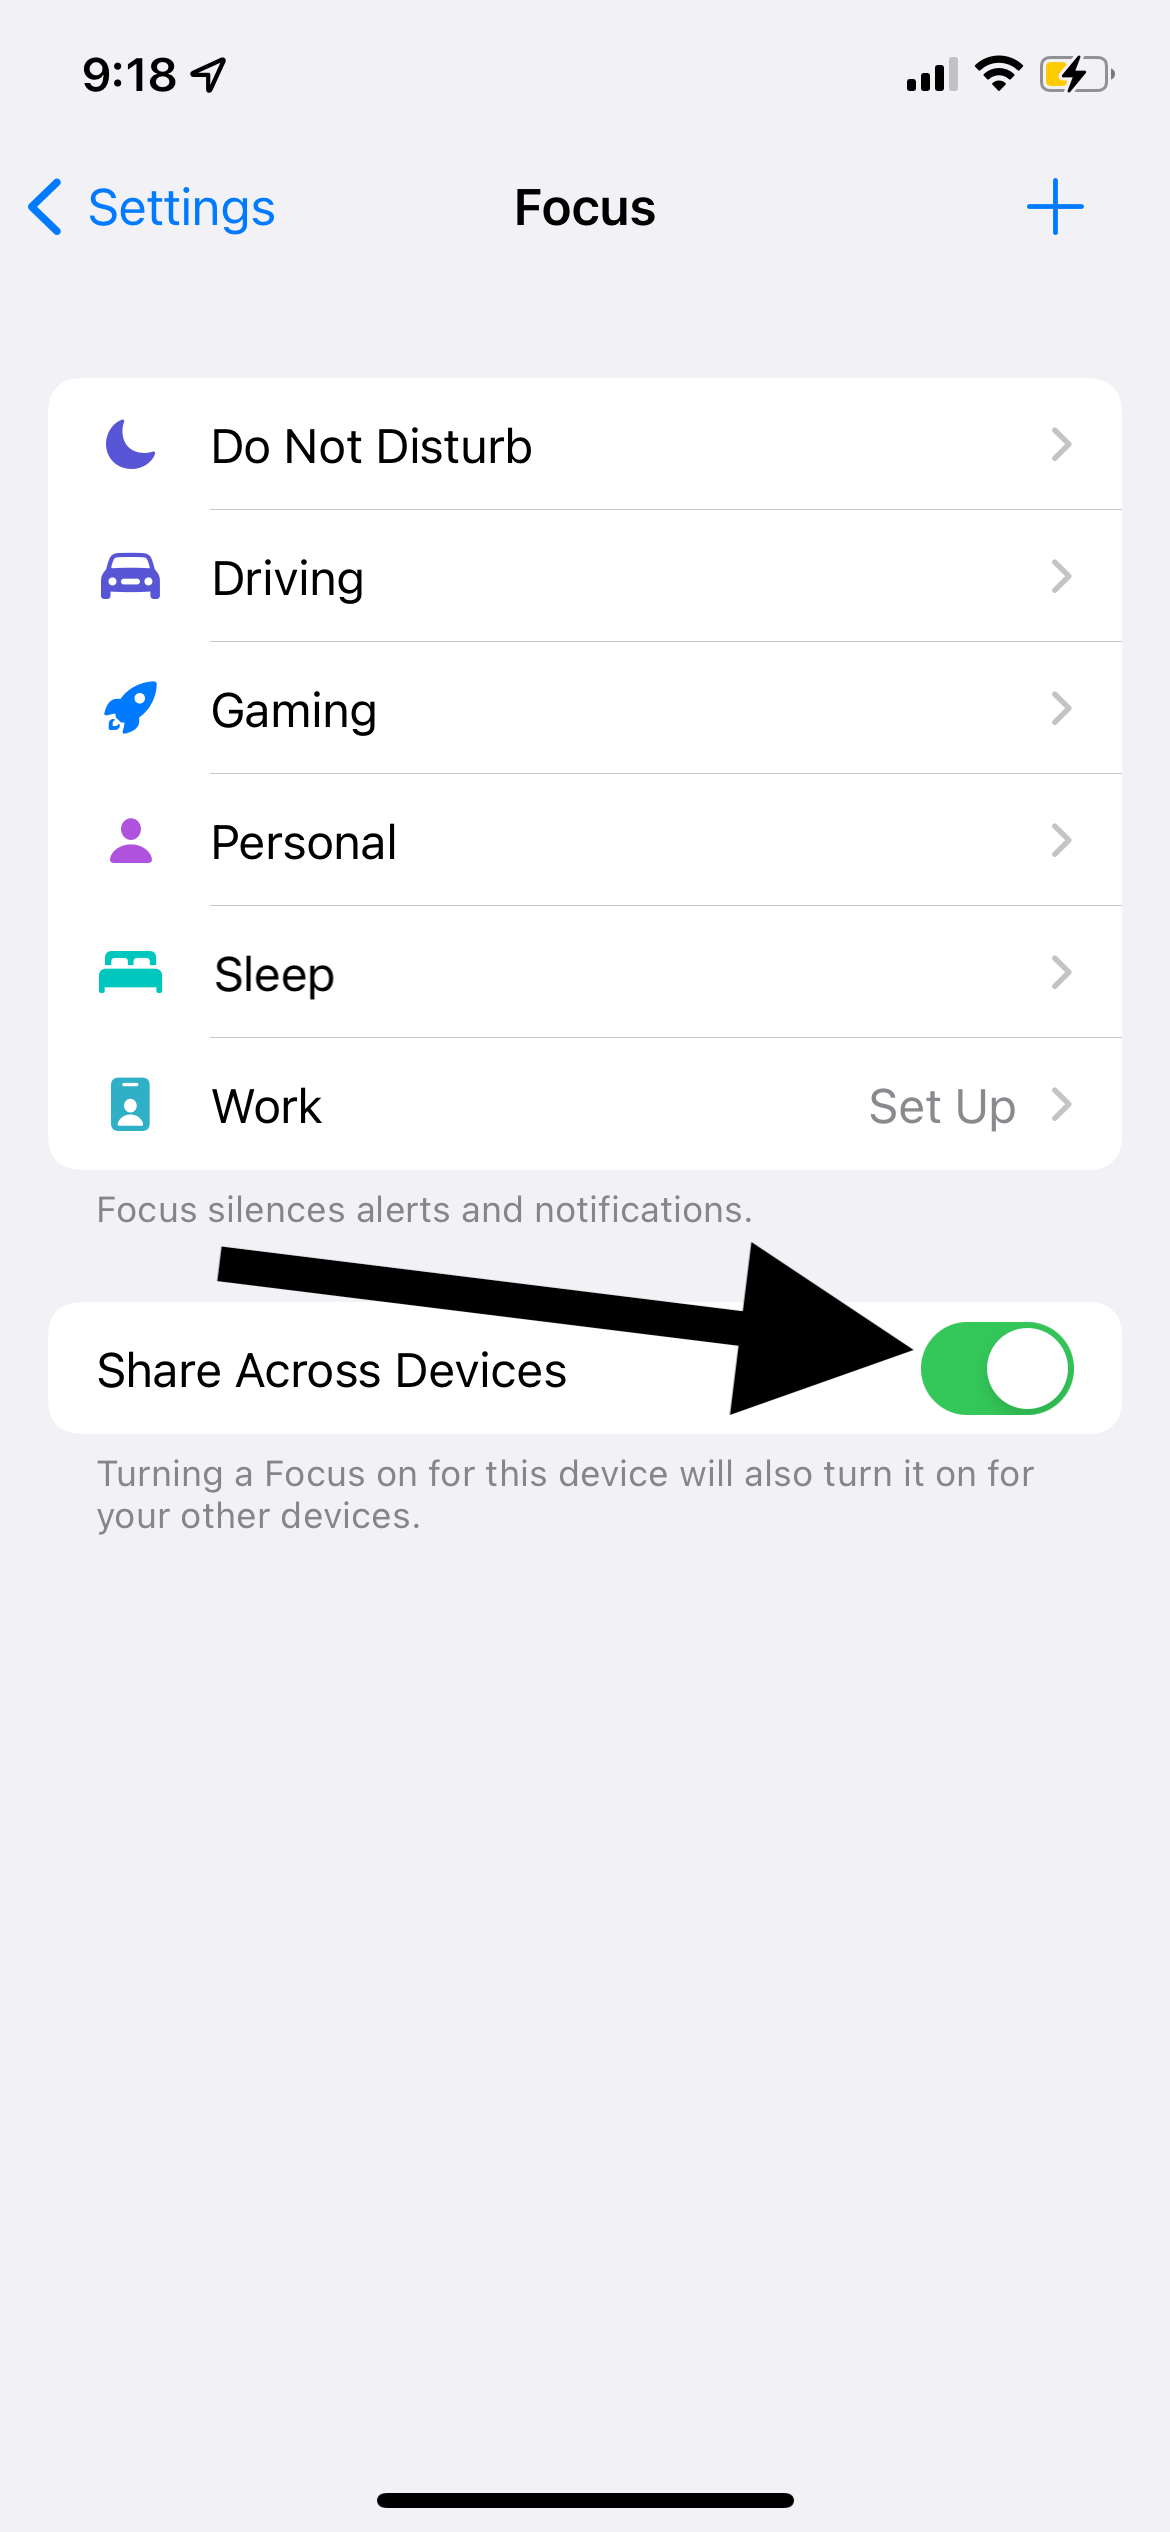 Share Across Devices setting